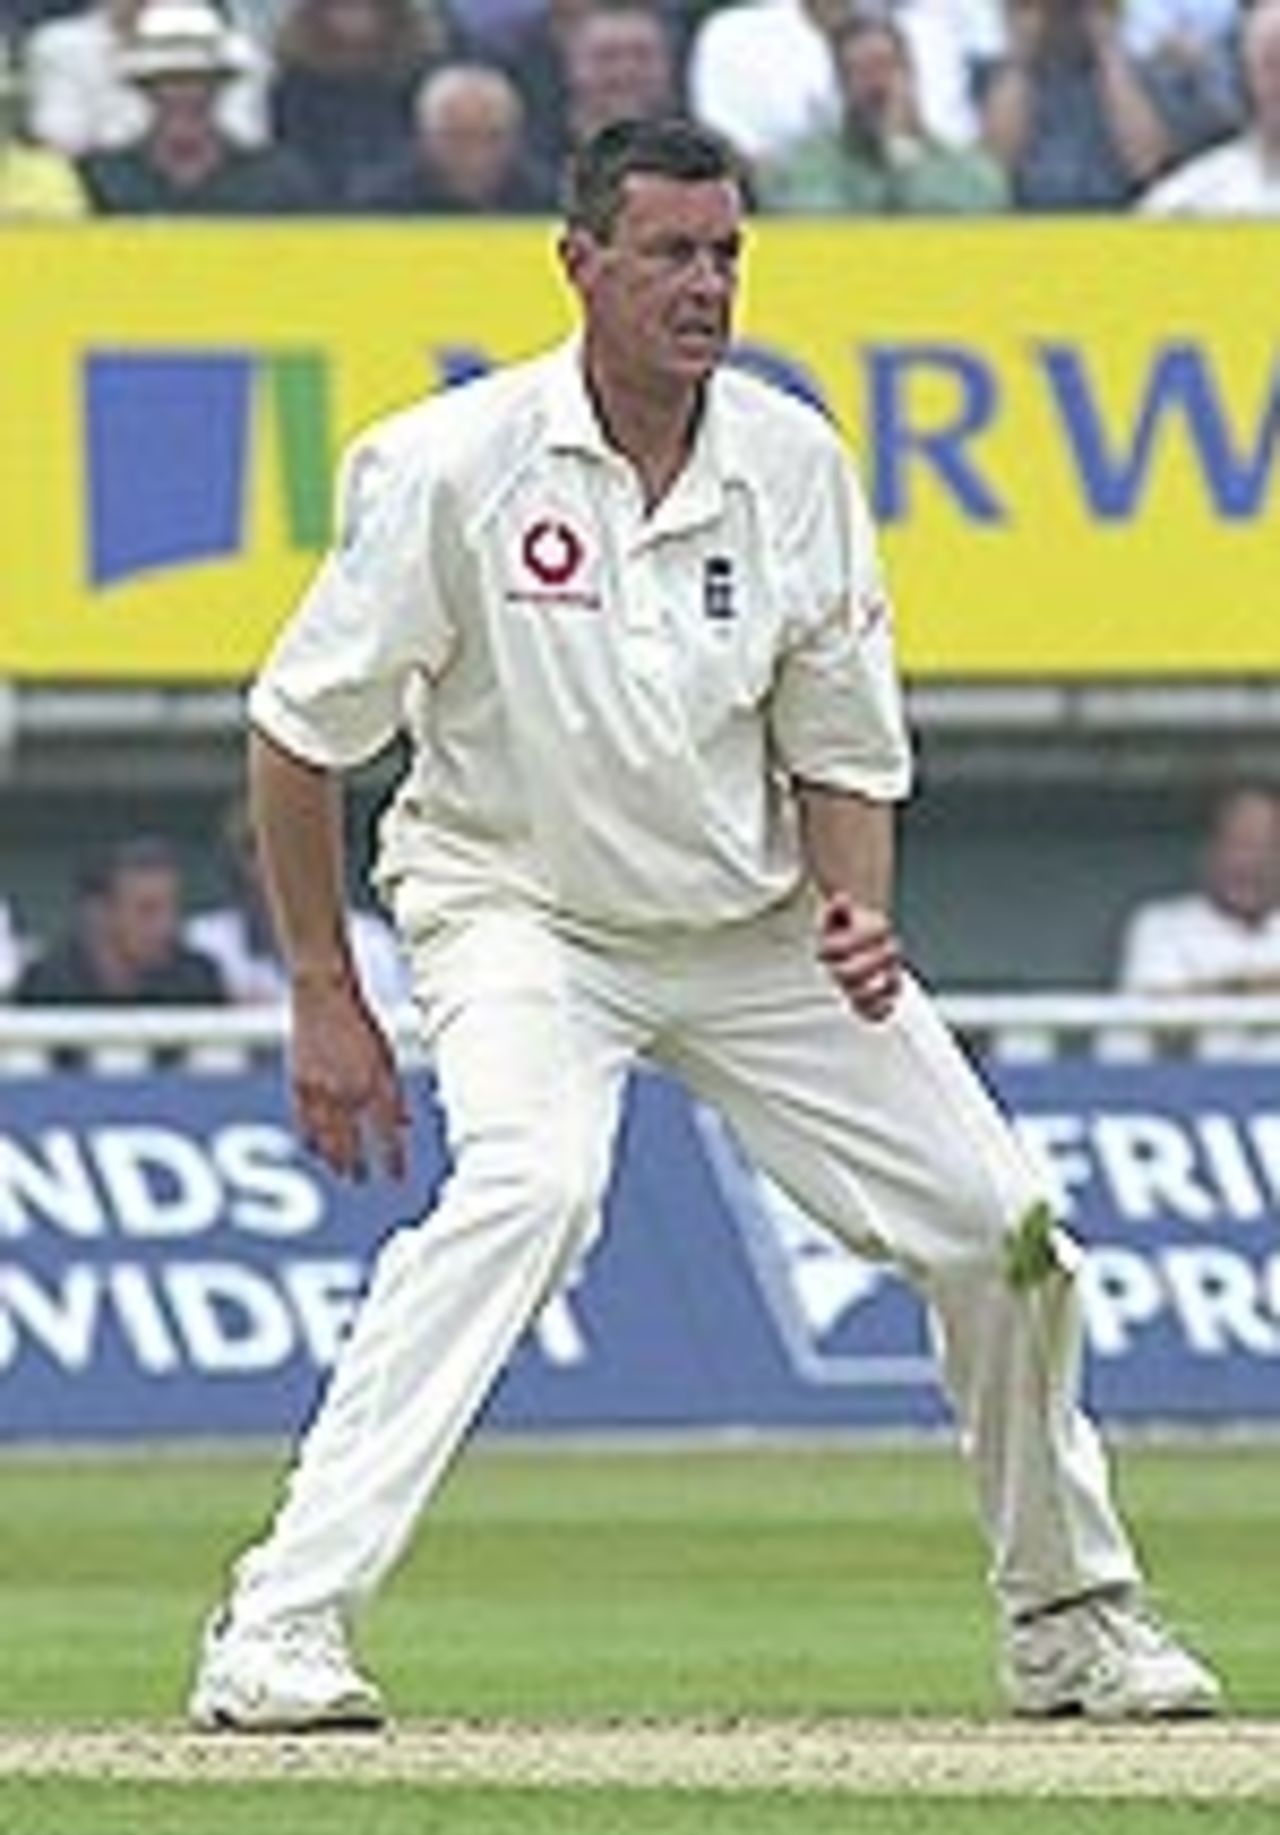 Taken at the first Ashes Test of the 2001 series at Birmingham